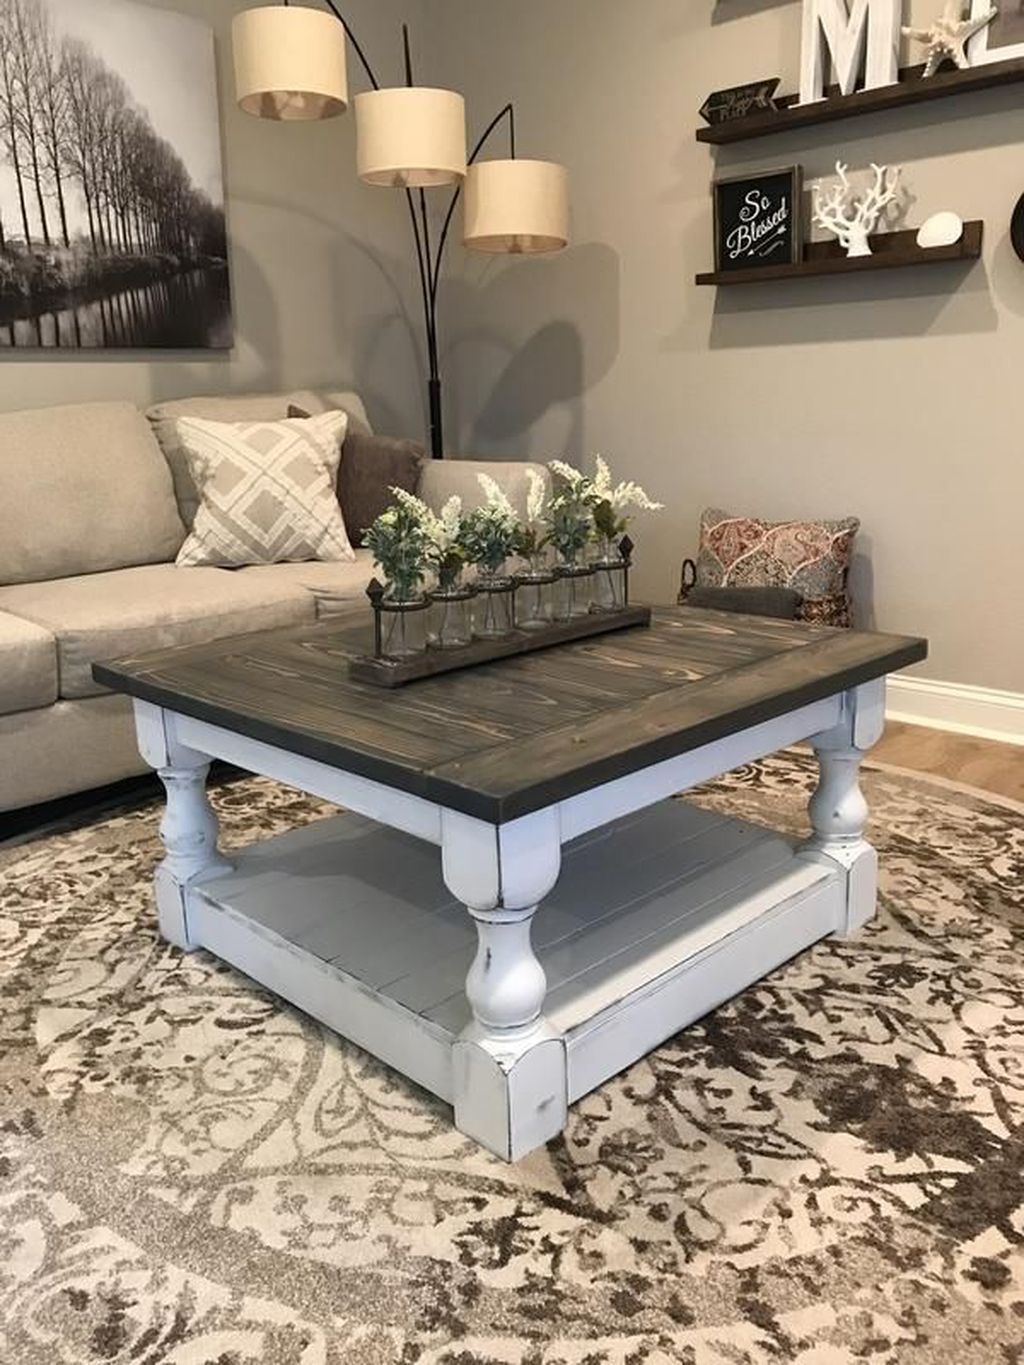 30+ Rustic Farmhouse Table Ideas To Use In The Decor | Farmhouse Style  Coffee Table, Coffee Table Farmhouse, Coffee Table Pertaining To Farmhouse Style Coffee Tables (View 6 of 20)